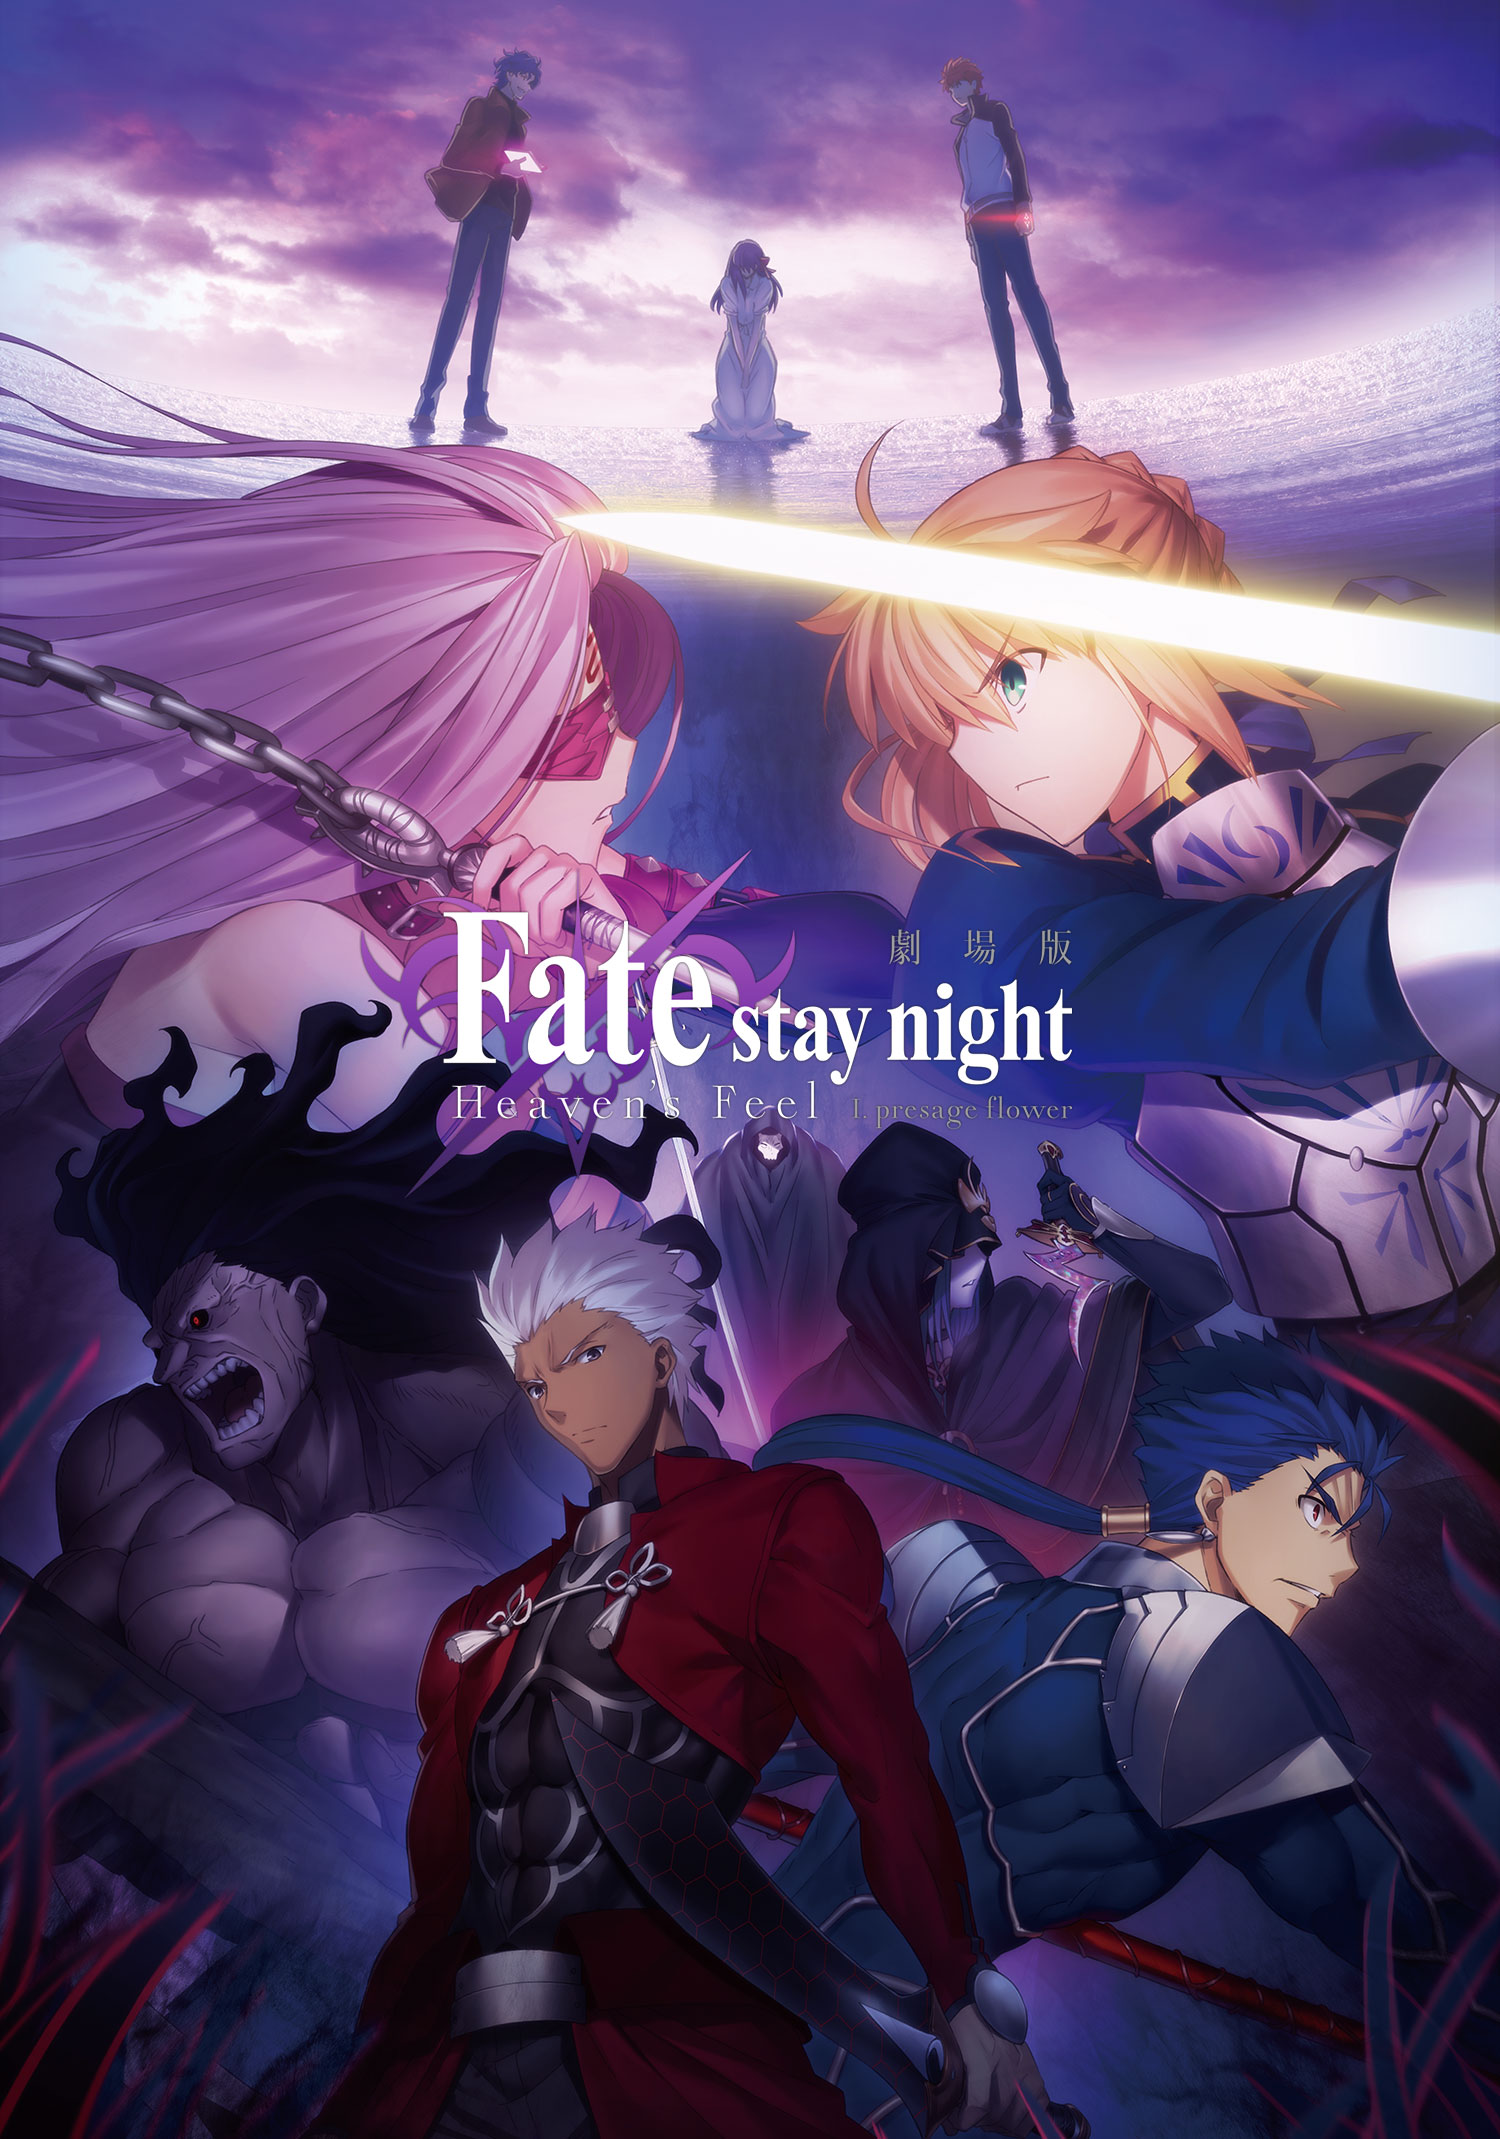 Stay Night Heaven S Feel Ii Lost Butterfly Visitors Benefits 1 Theatrical Fate Animation Art Characters Japanese Anime